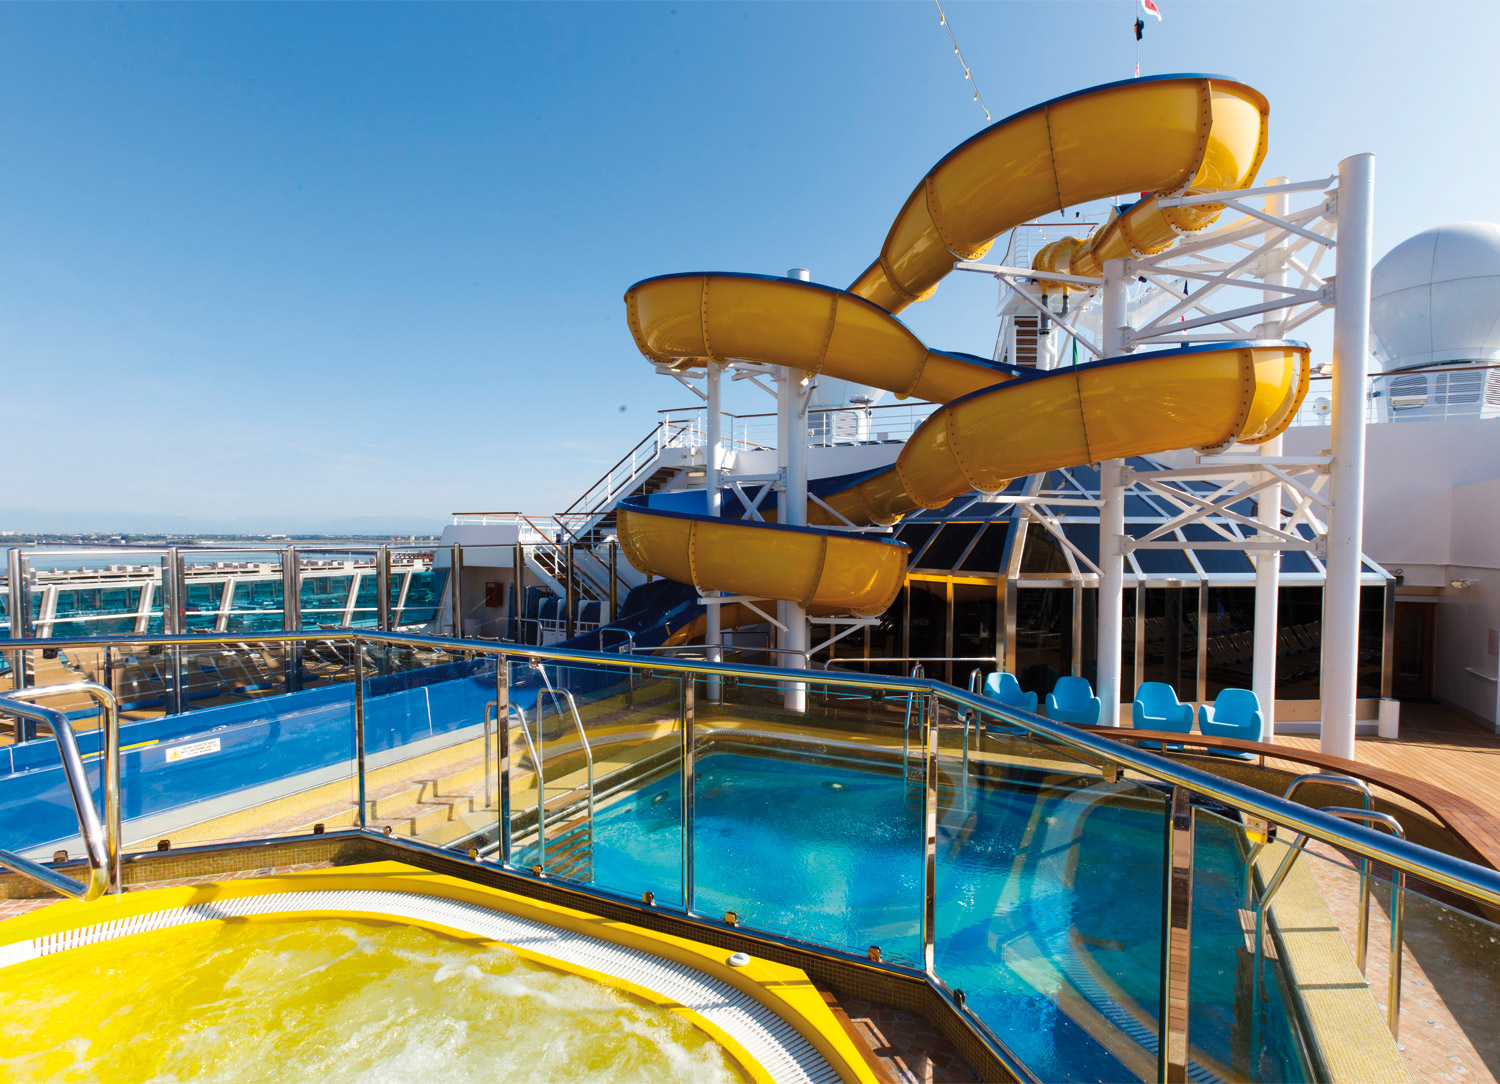  Enjoy slipping and sliding down this exciting waterslide! 